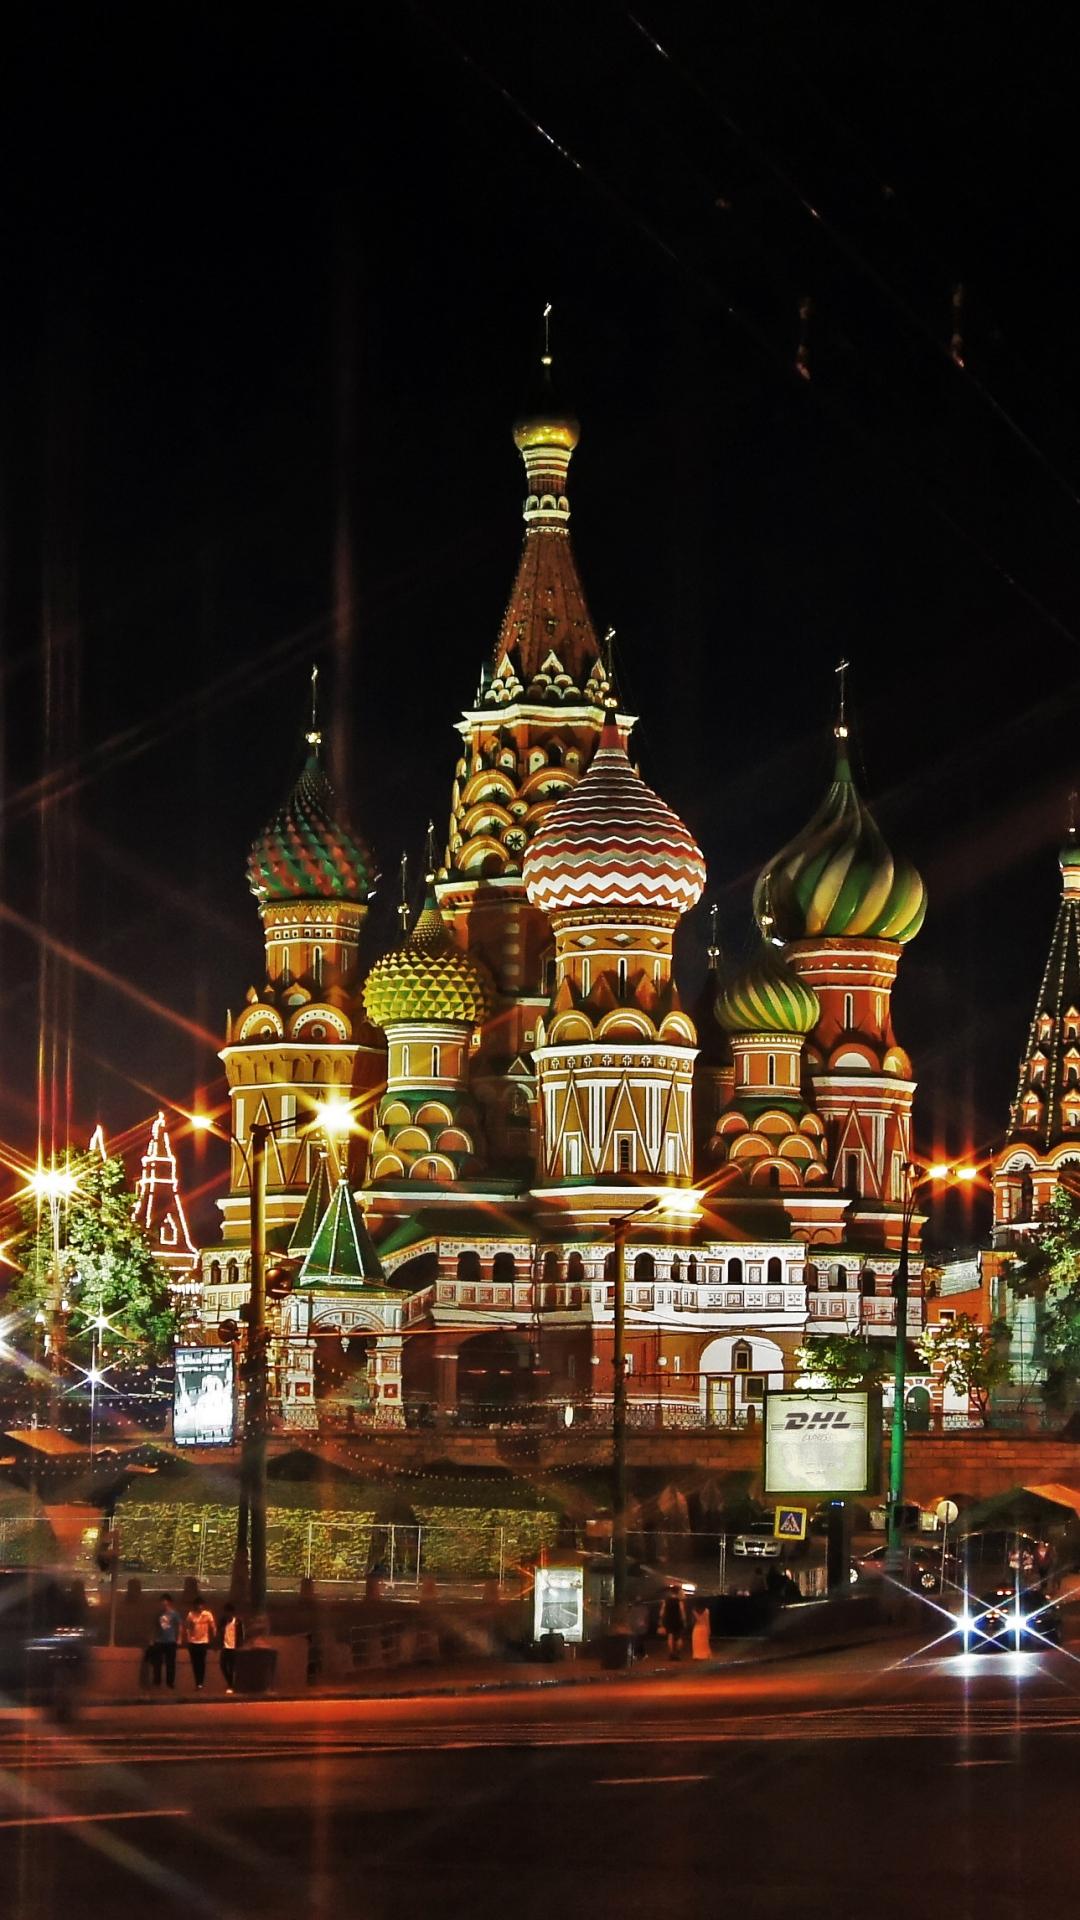 Moscow At Night Wallpapers - Wallpaper Cave